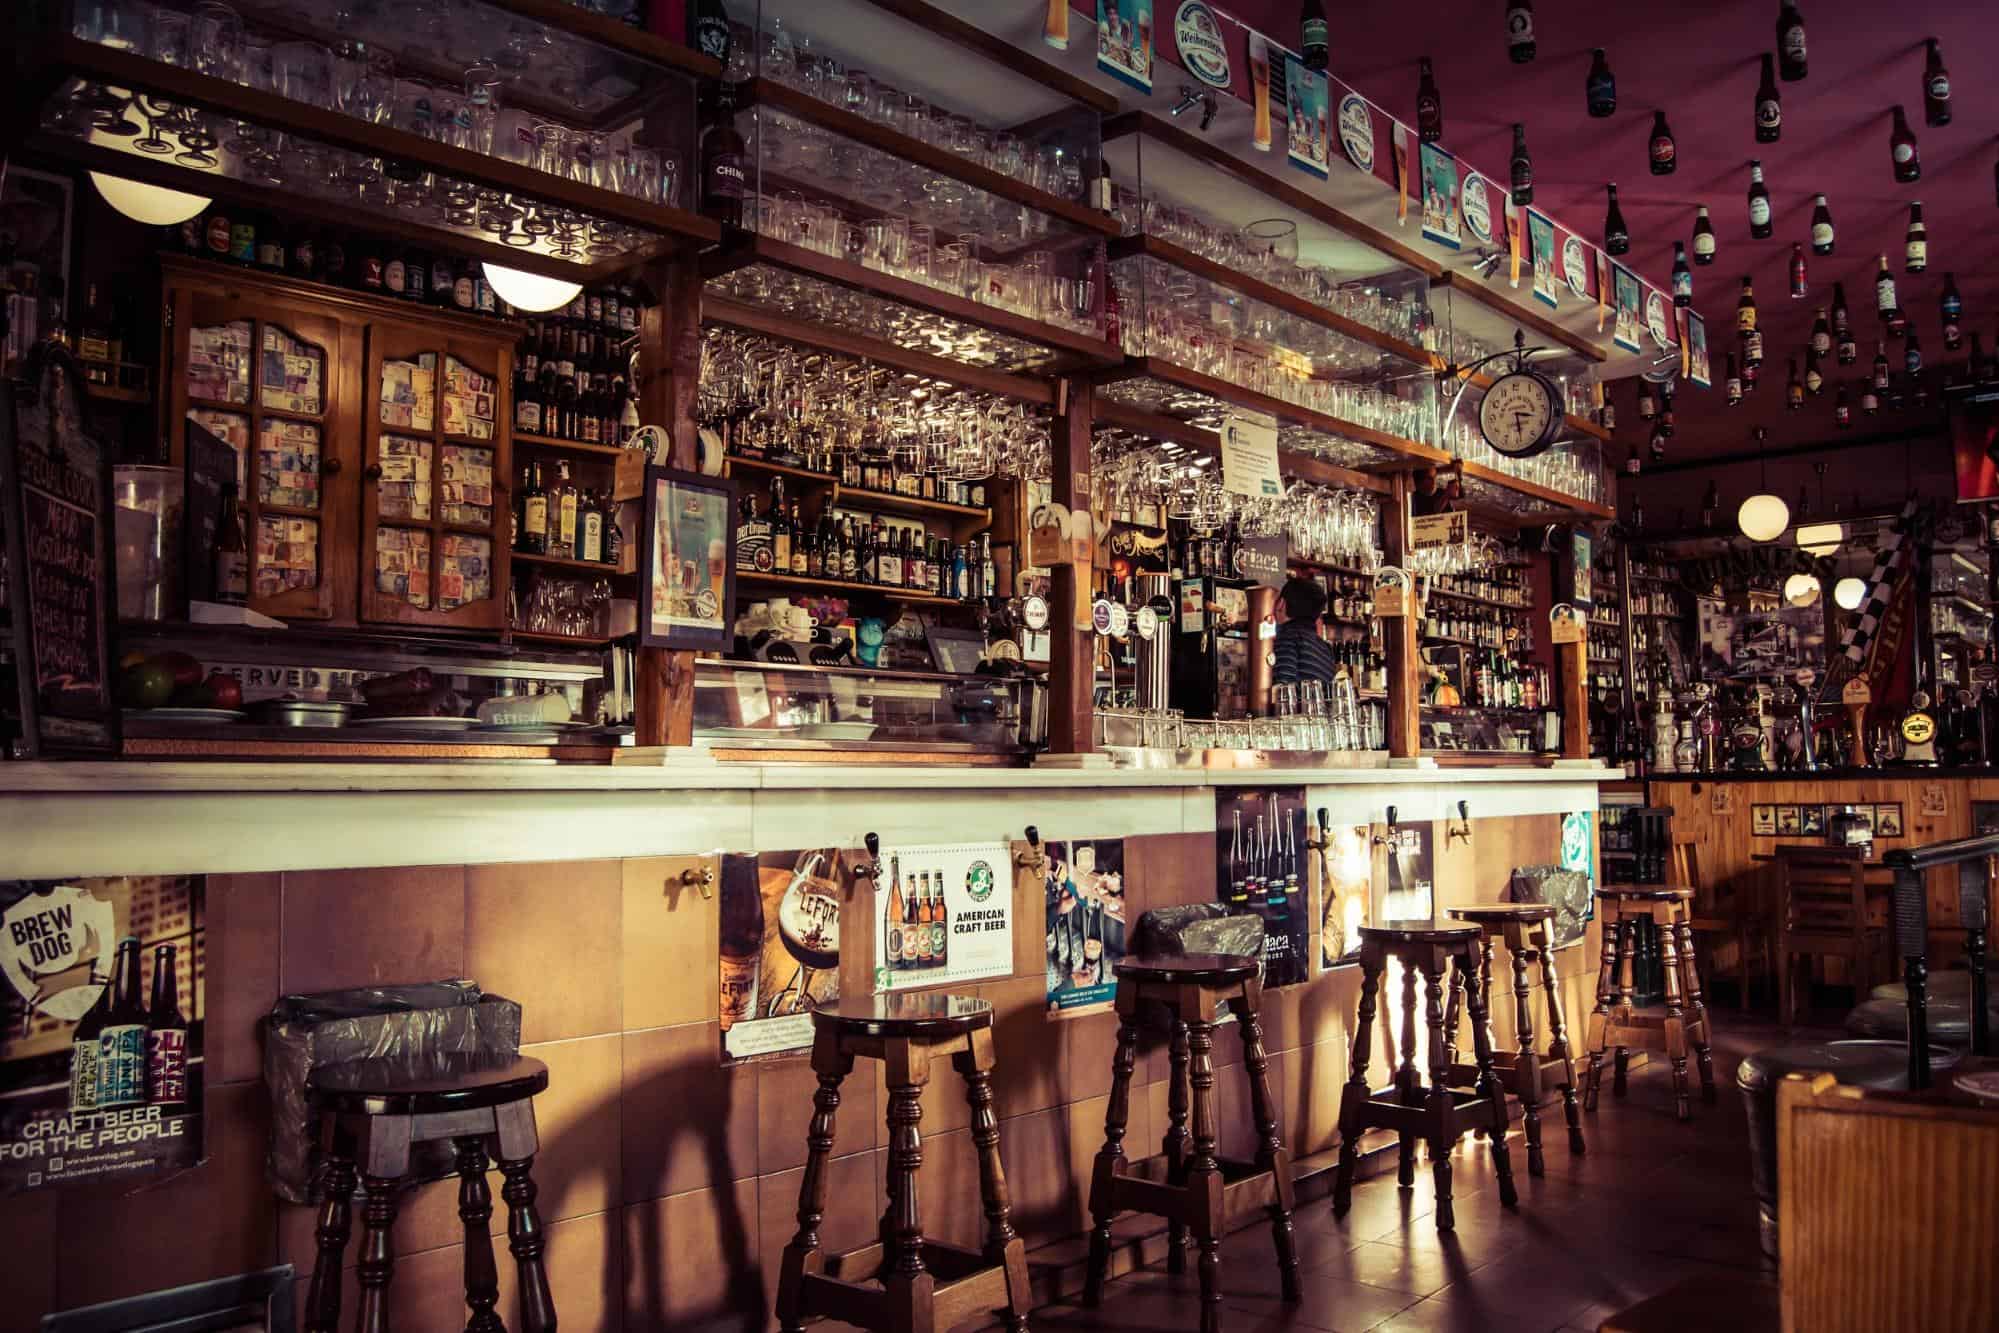 barstools and shelves with liquor bottles in an empty bar